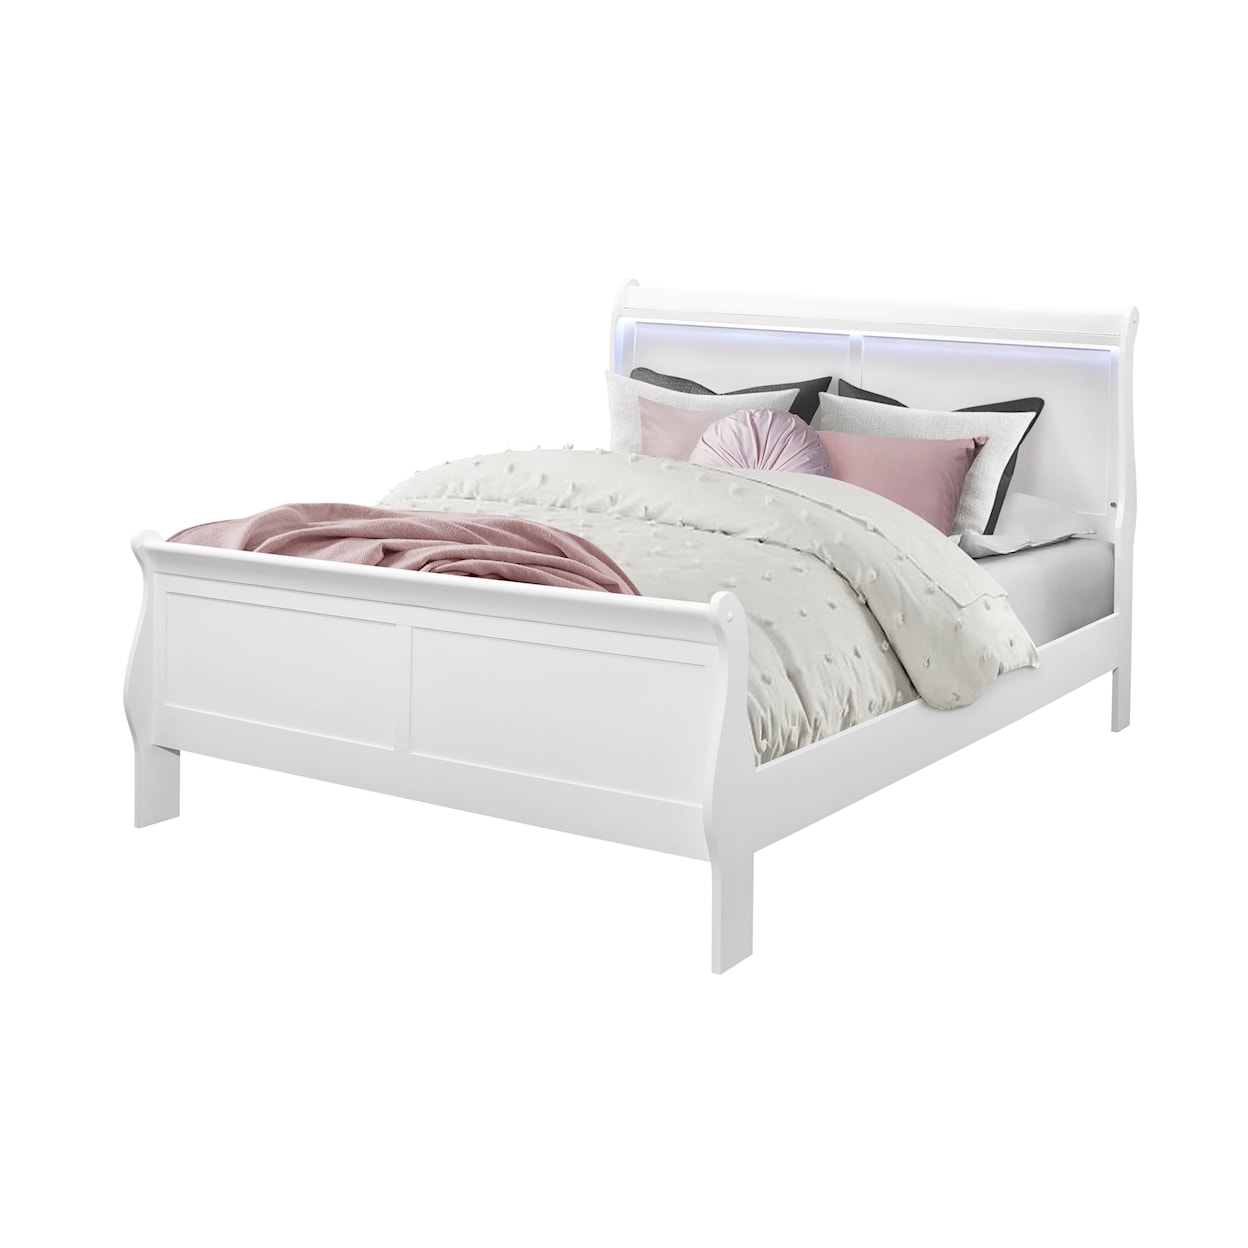 Global Furniture Charlie White Queen Bed